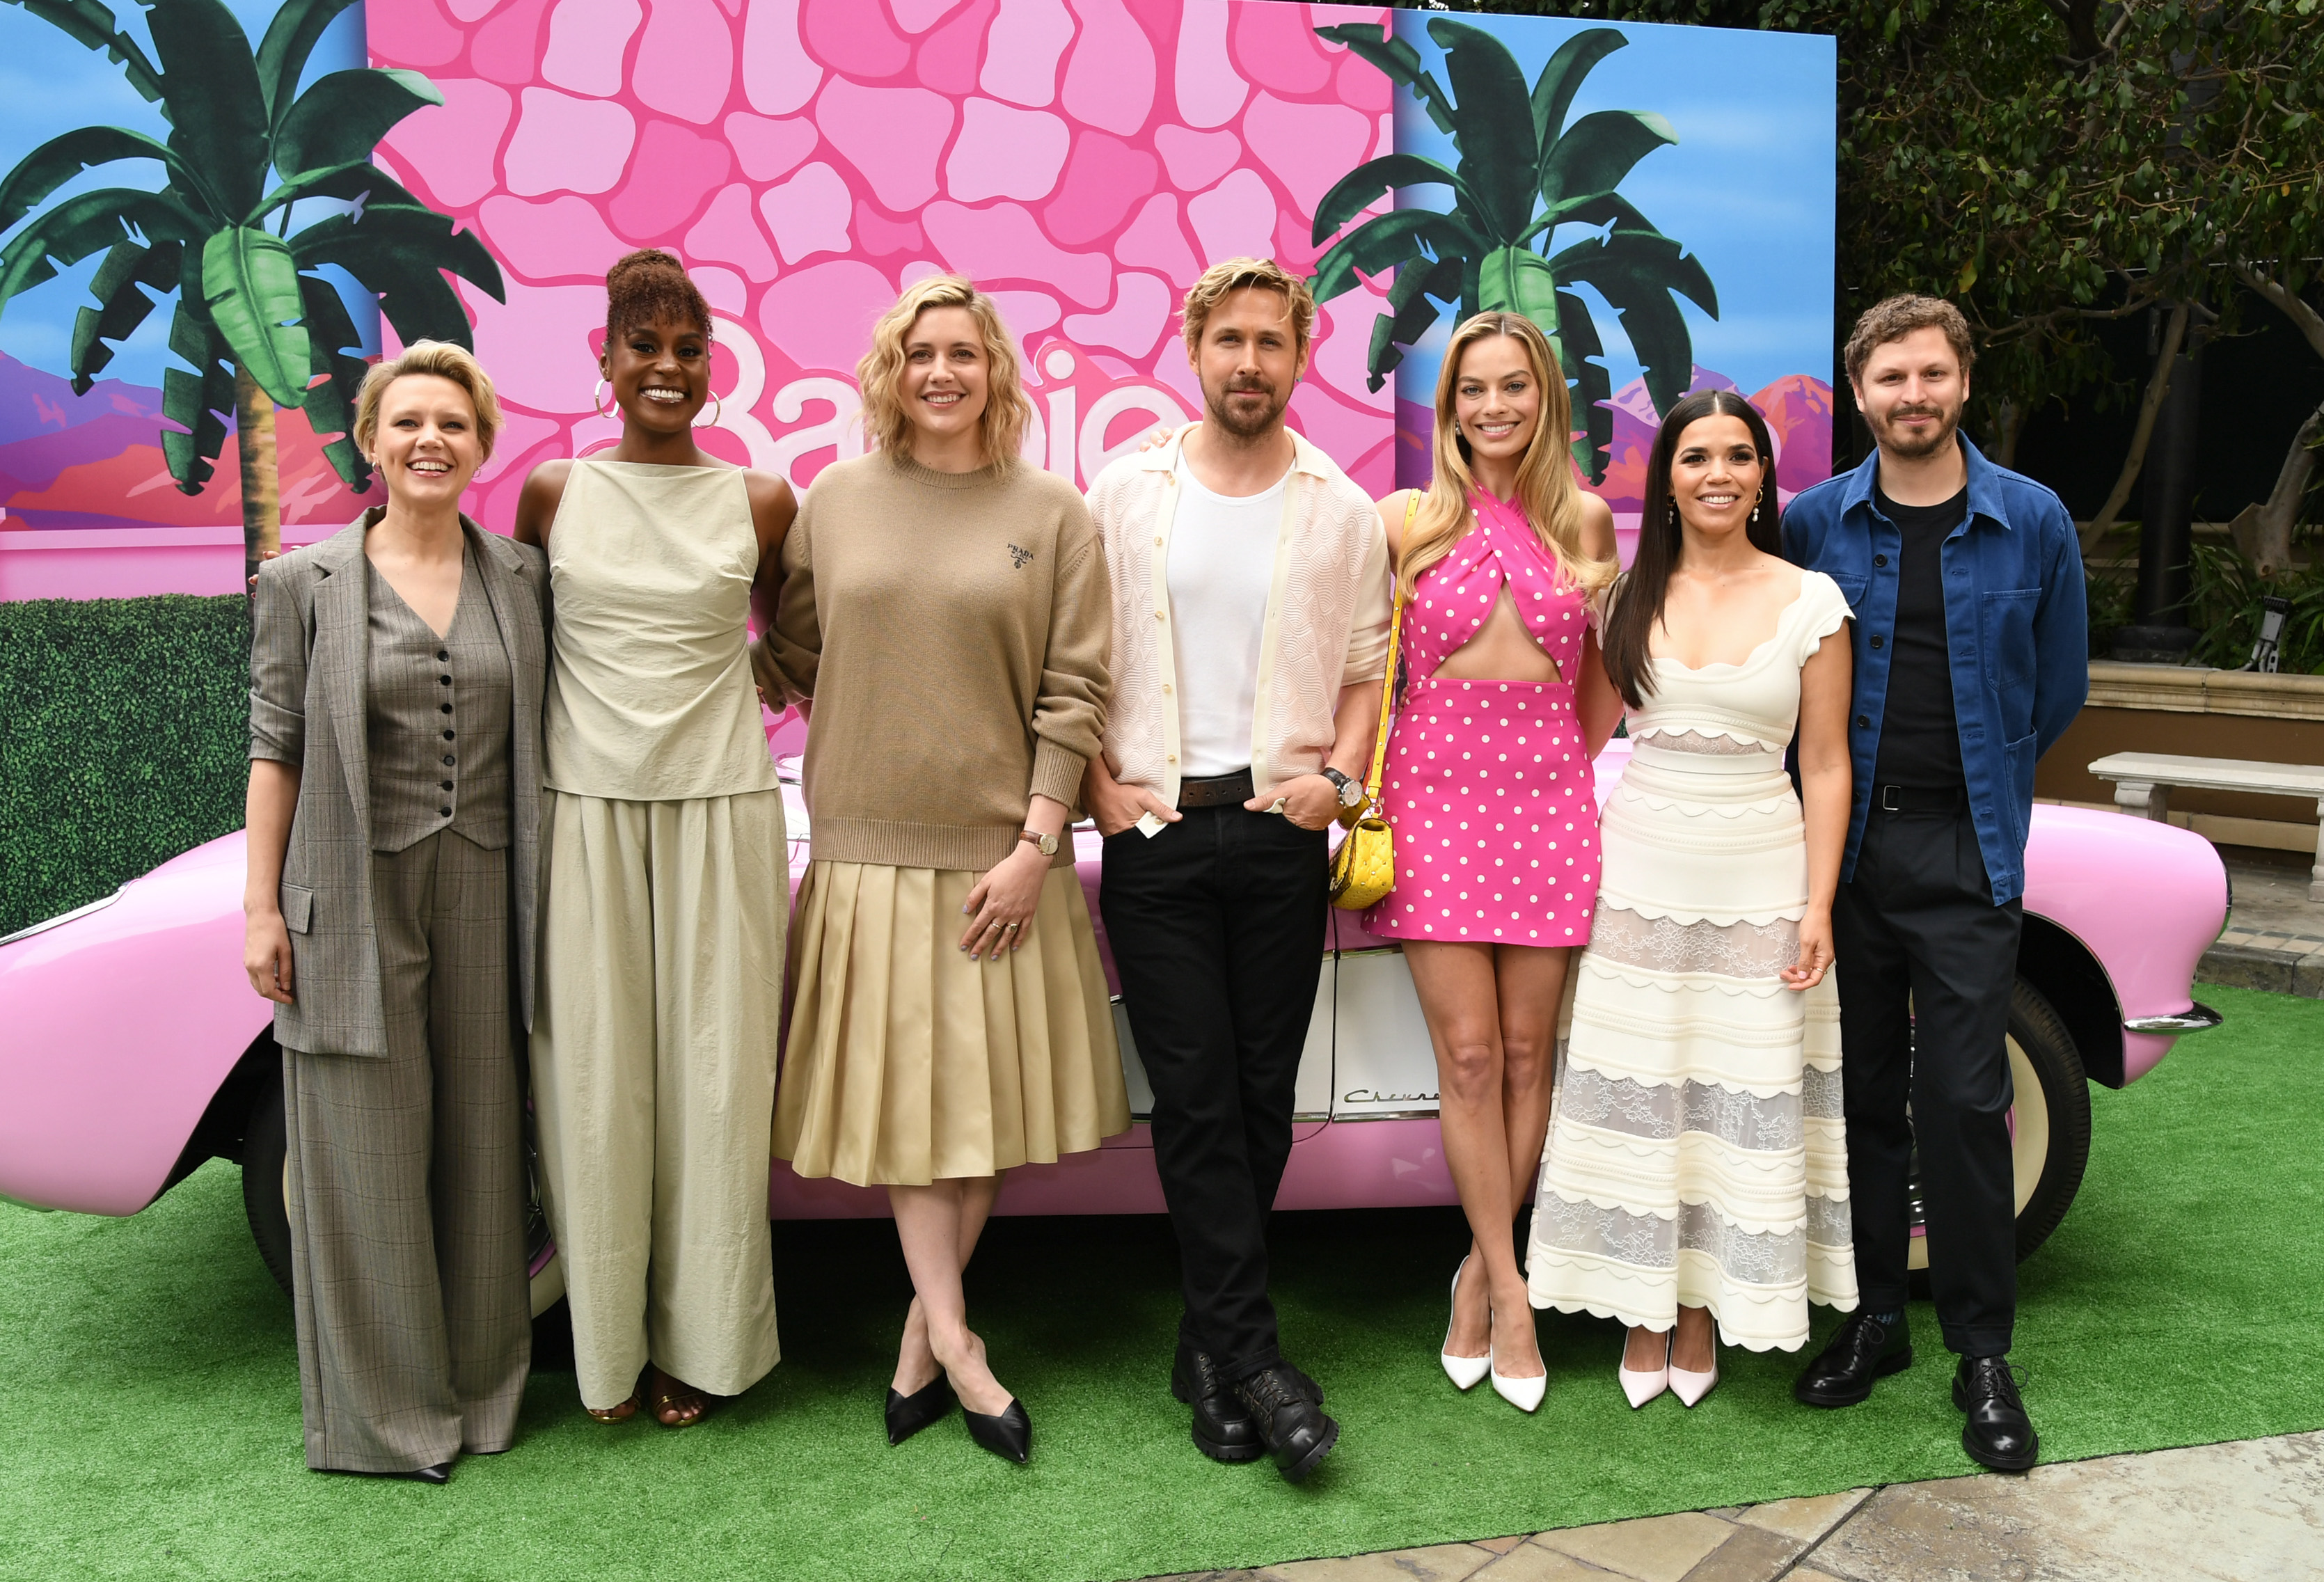 Kate McKinnon, Issa Rae, Greta Gerwig, Ryan Gosling, Margot Robbie, America Ferrera and Michael Cera attend the press junket and photo call For "Barbie" at Four Seasons Hotel Los Angeles at Beverly Hills on June 25, 2023 in Los Angeles, California | Source: Getty Images